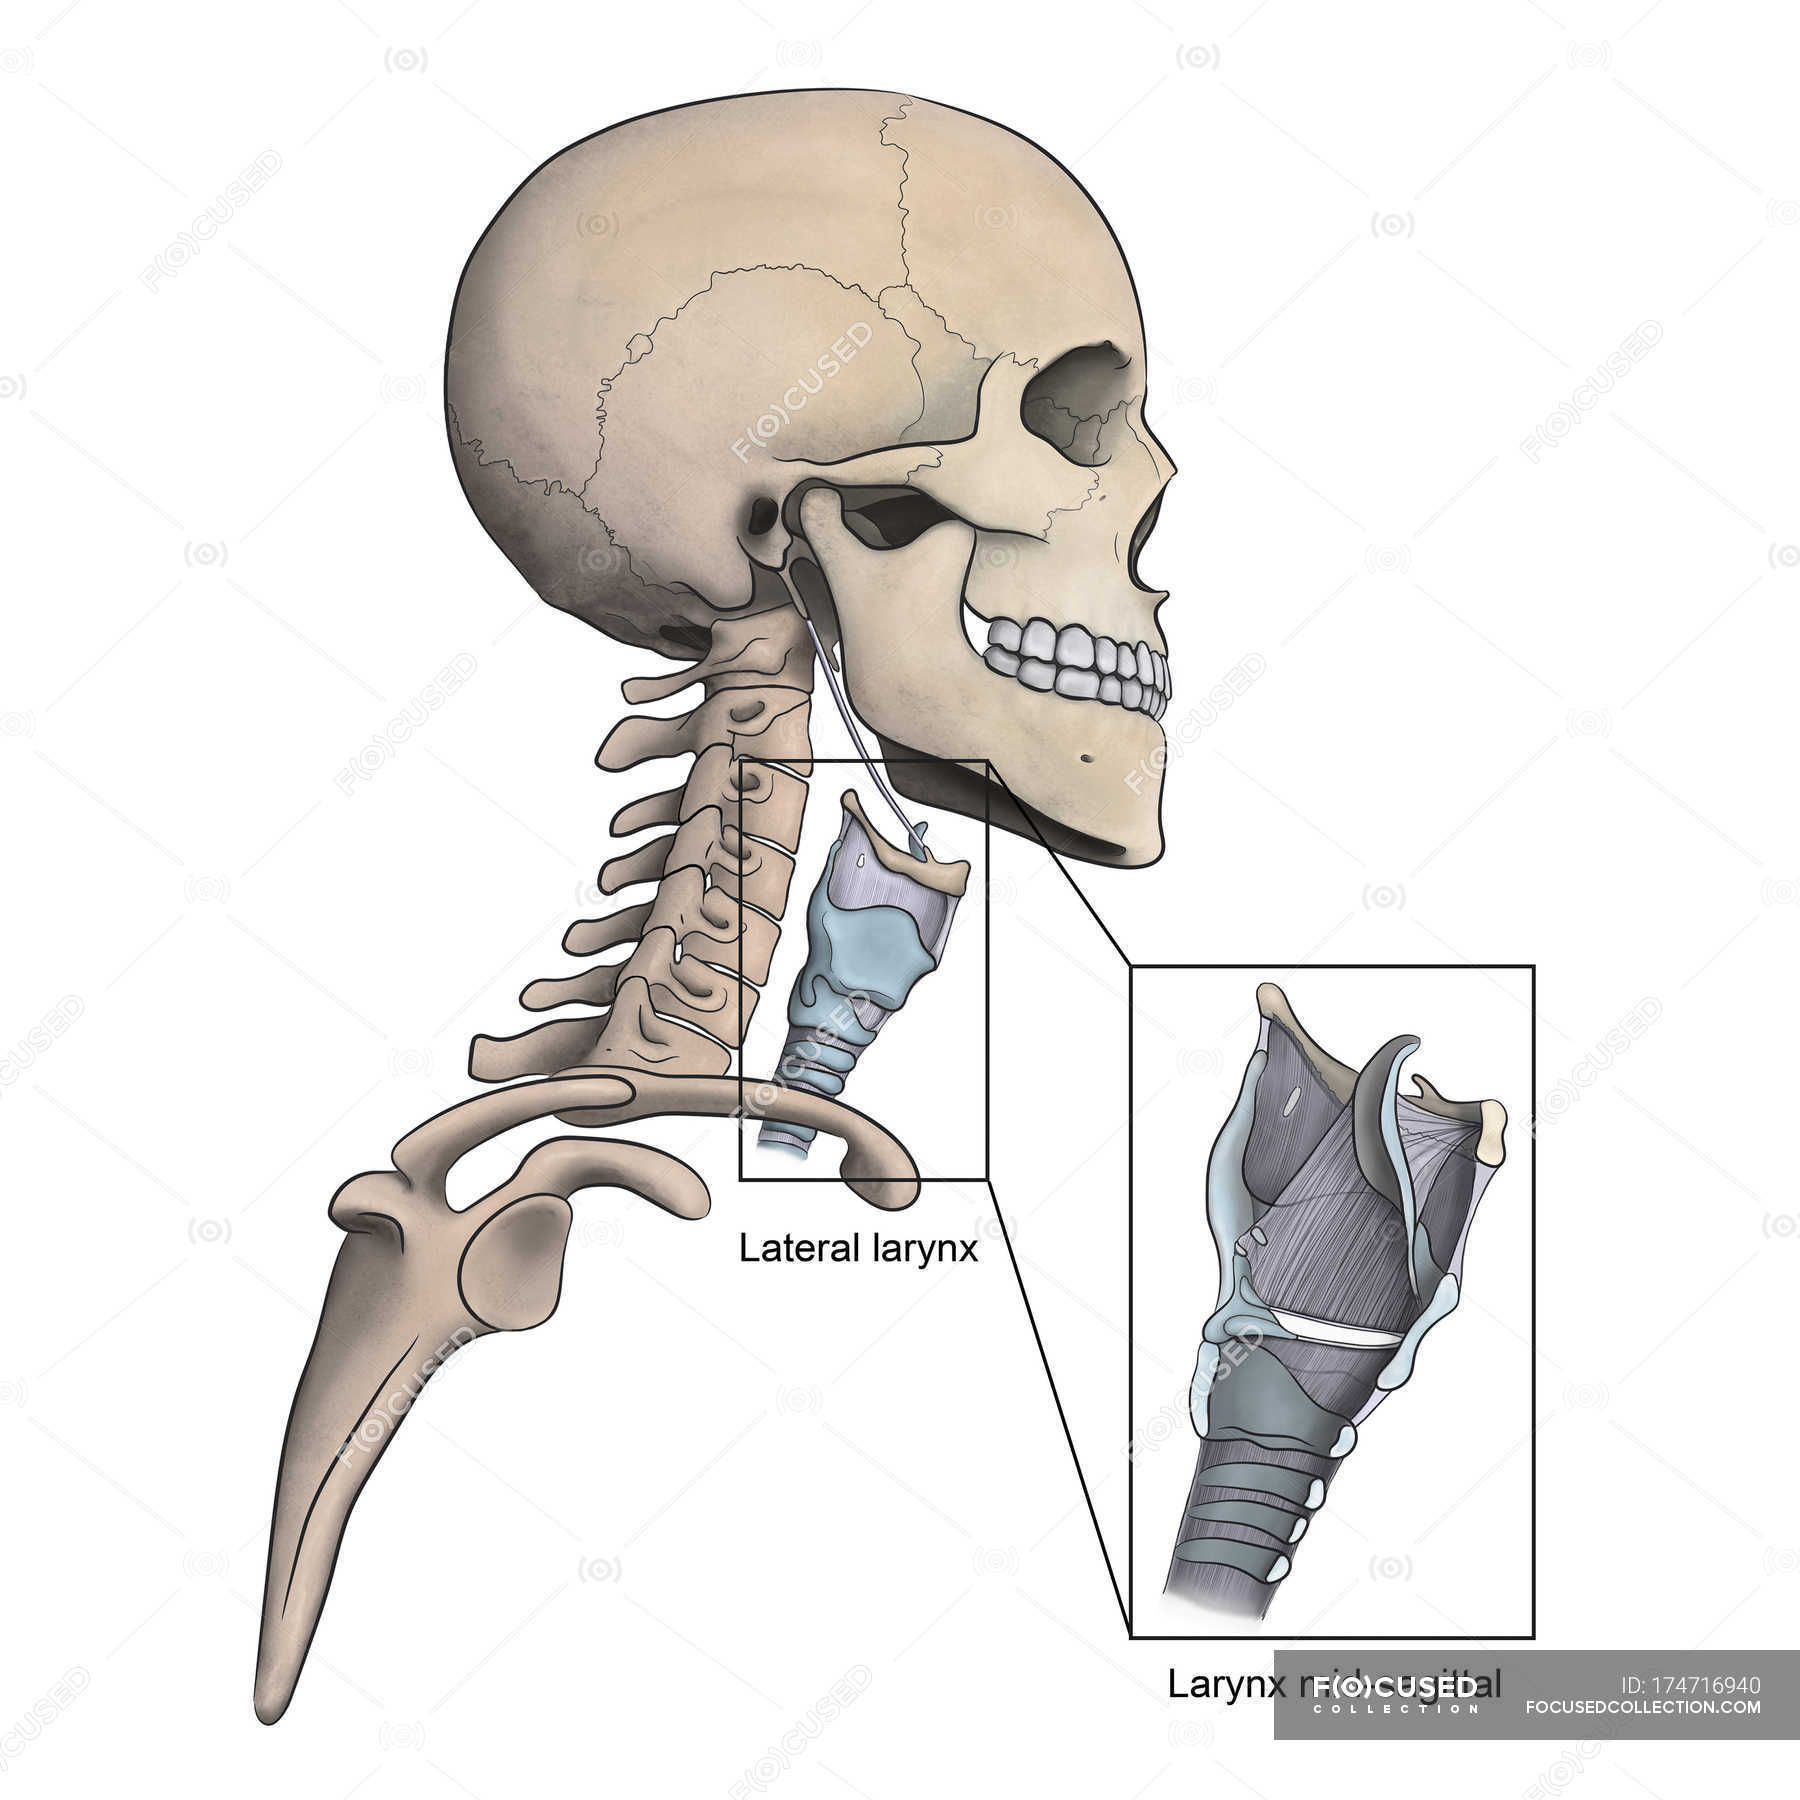 Lateral larynx and skeletal anatomy with mid-sagittal ...